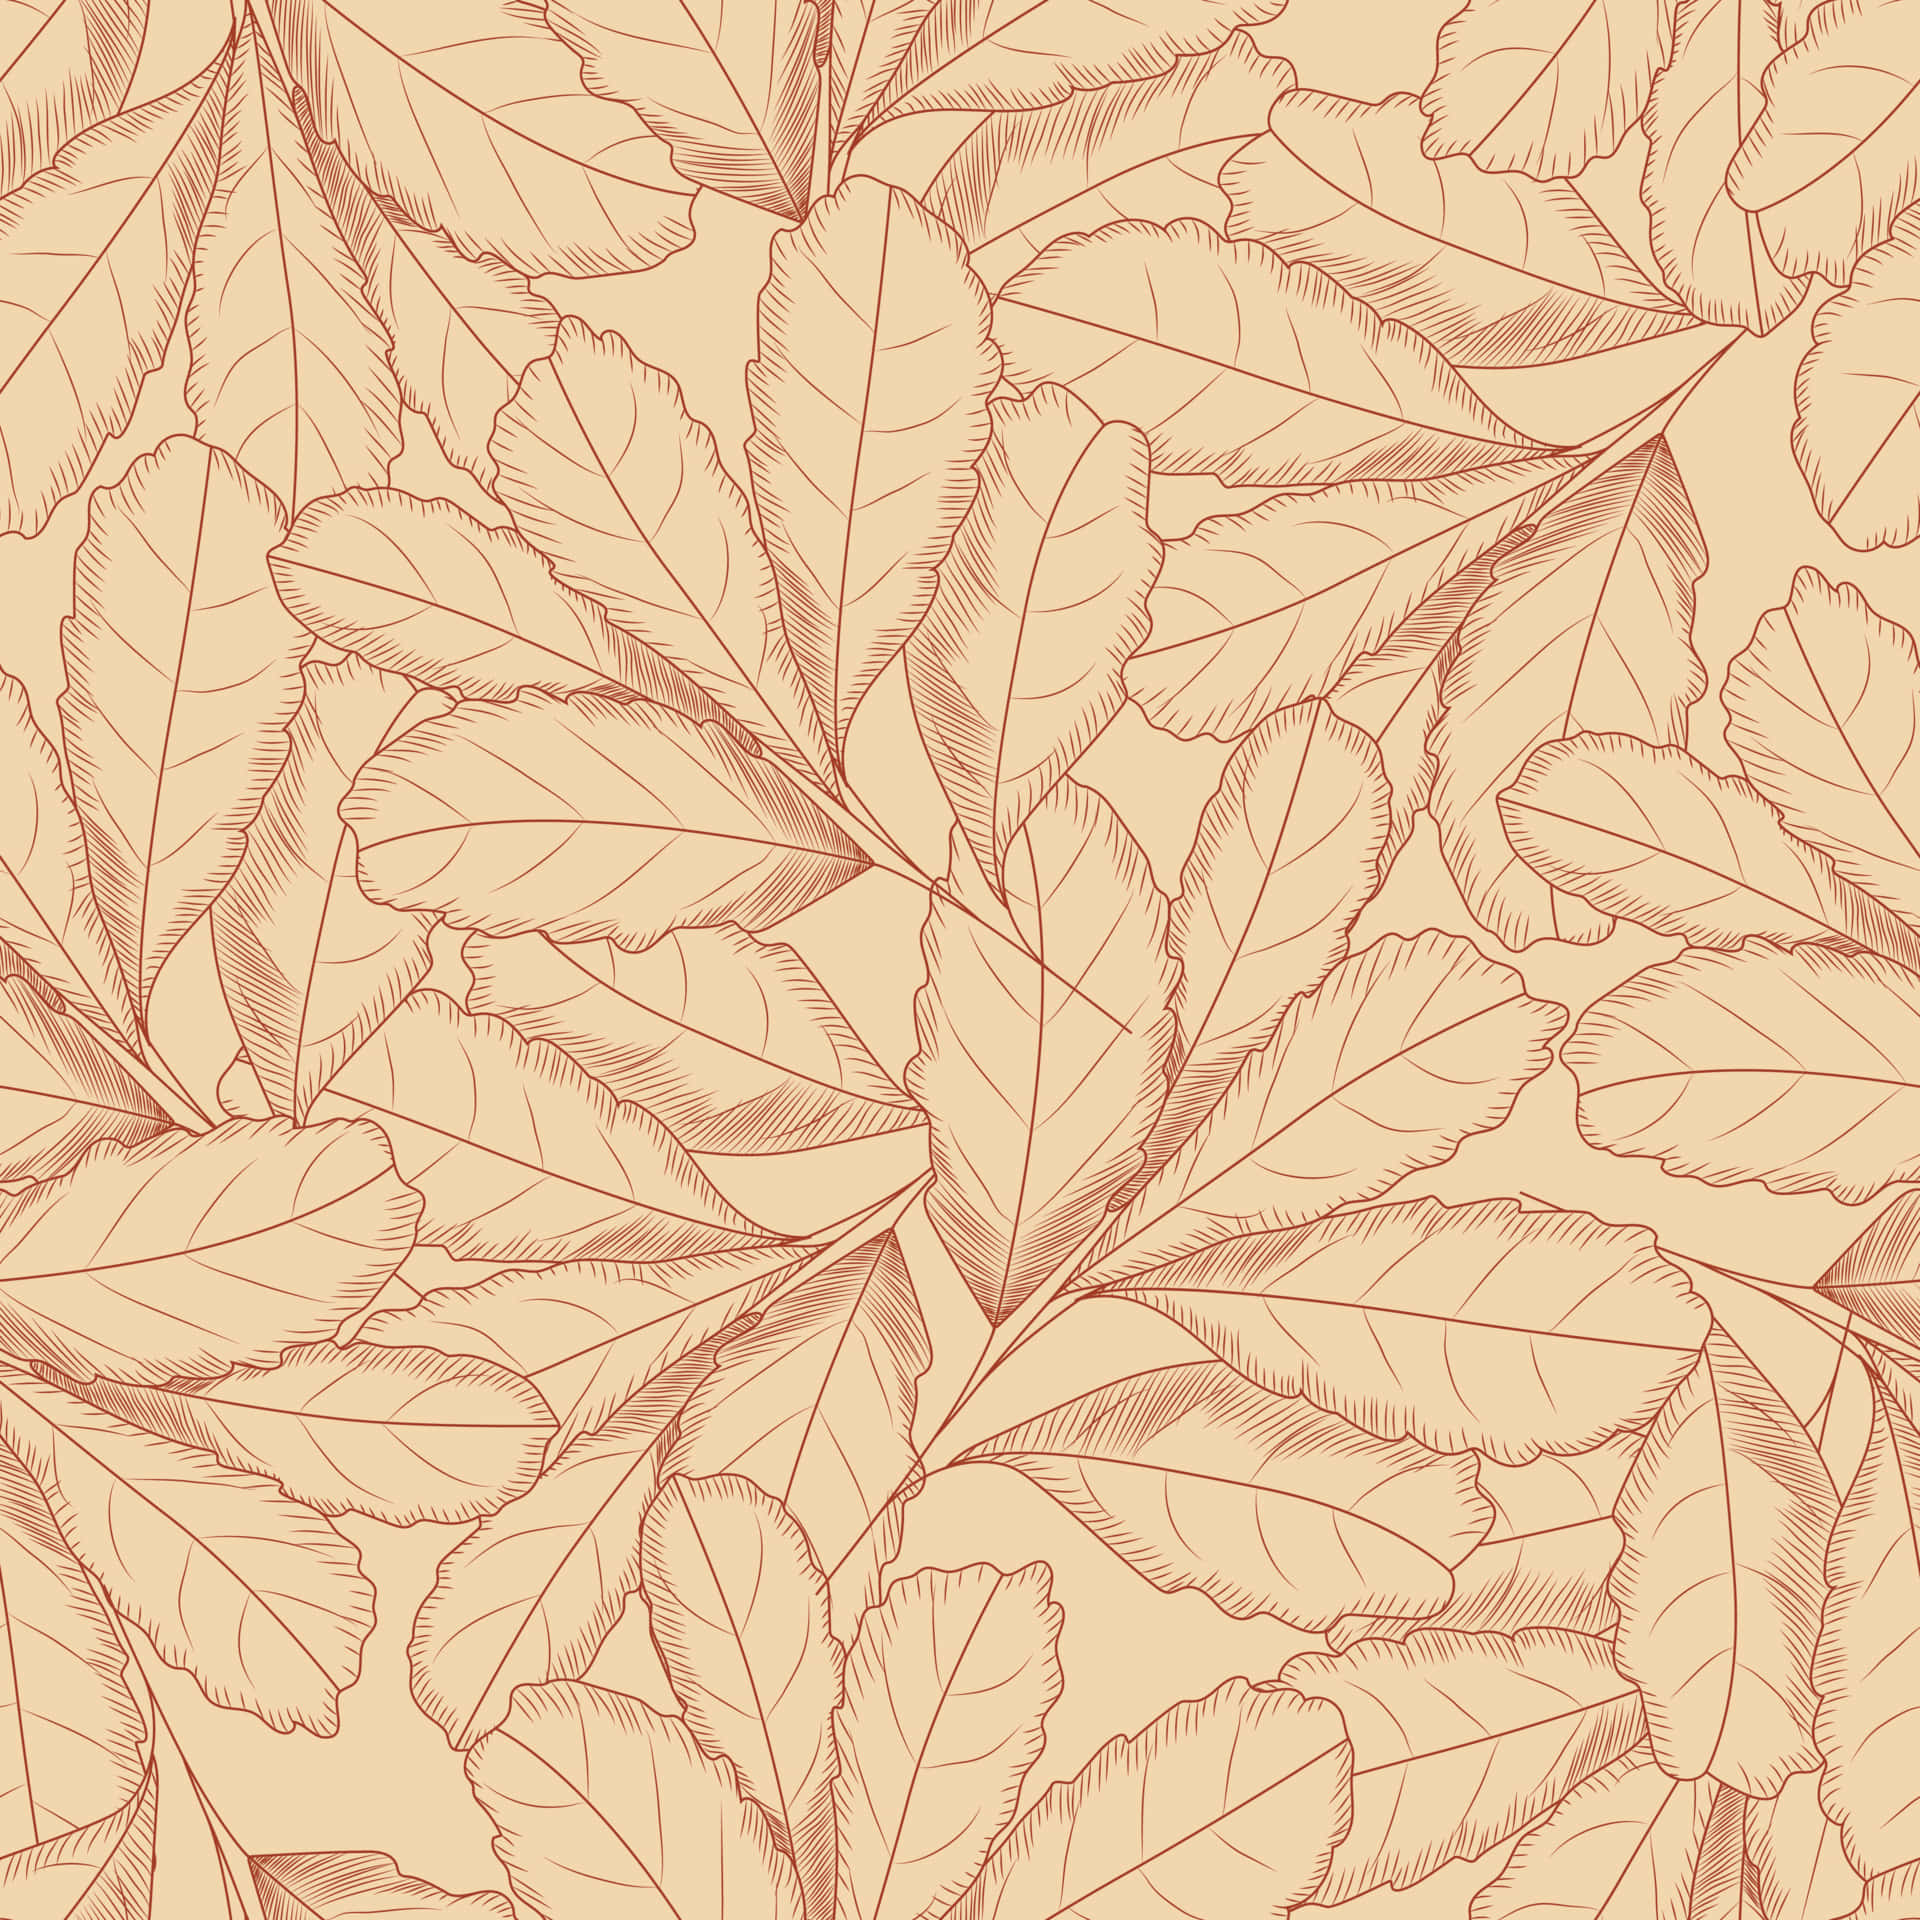 Vintage Autumn Leaves Drawing Wallpaper